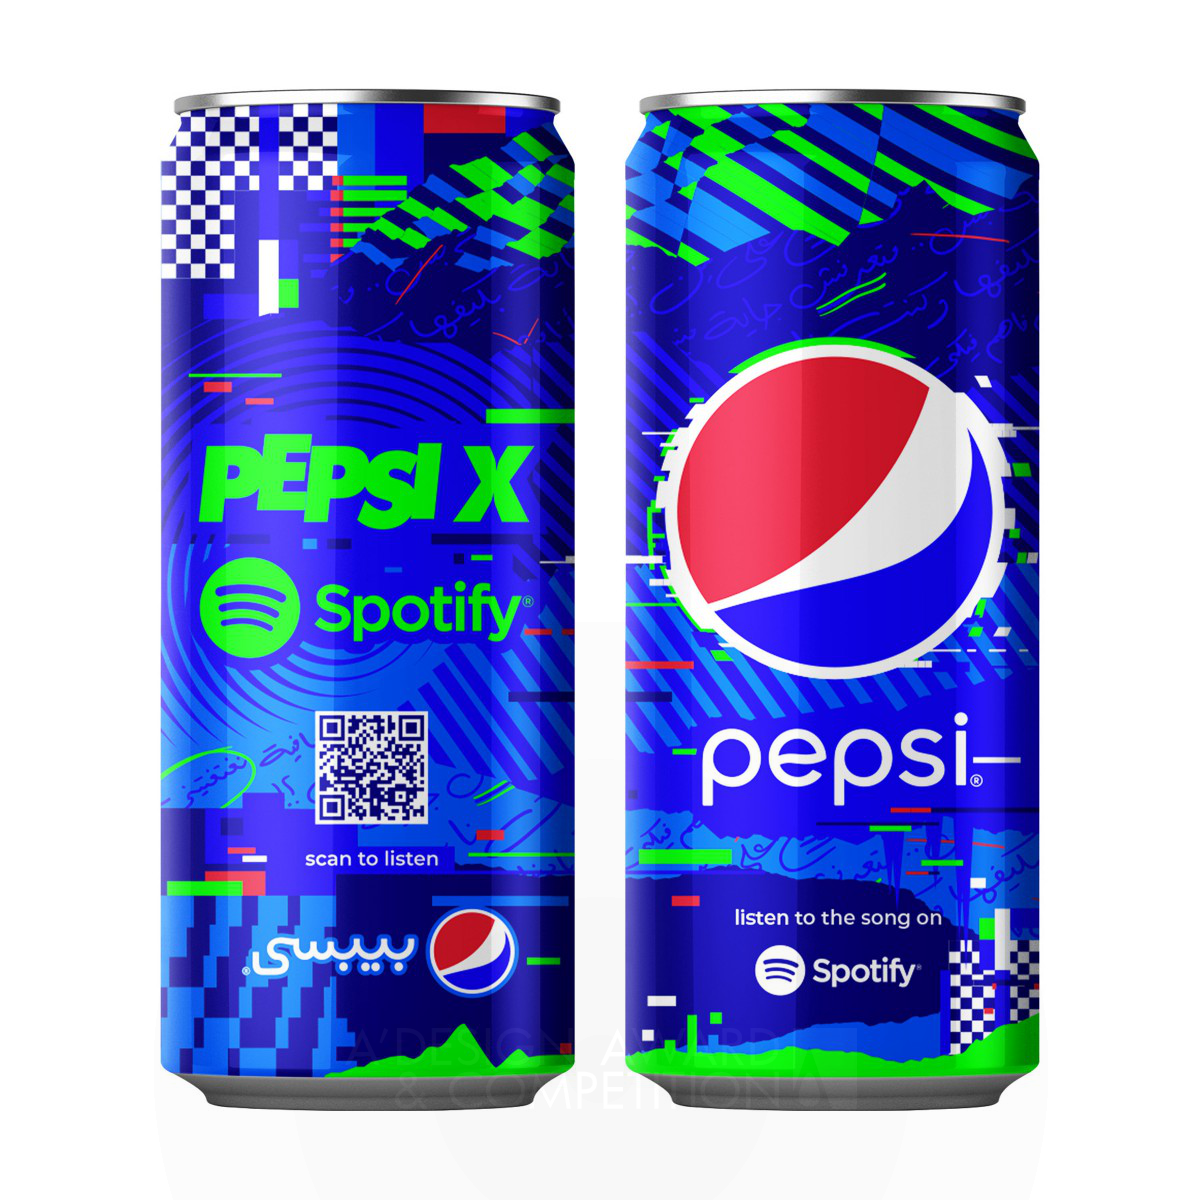 PepsiCo Design and Innovation wins Bronze at the prestigious A' Packaging Design Award with Pepsi X Spotify Beverage Packaging.